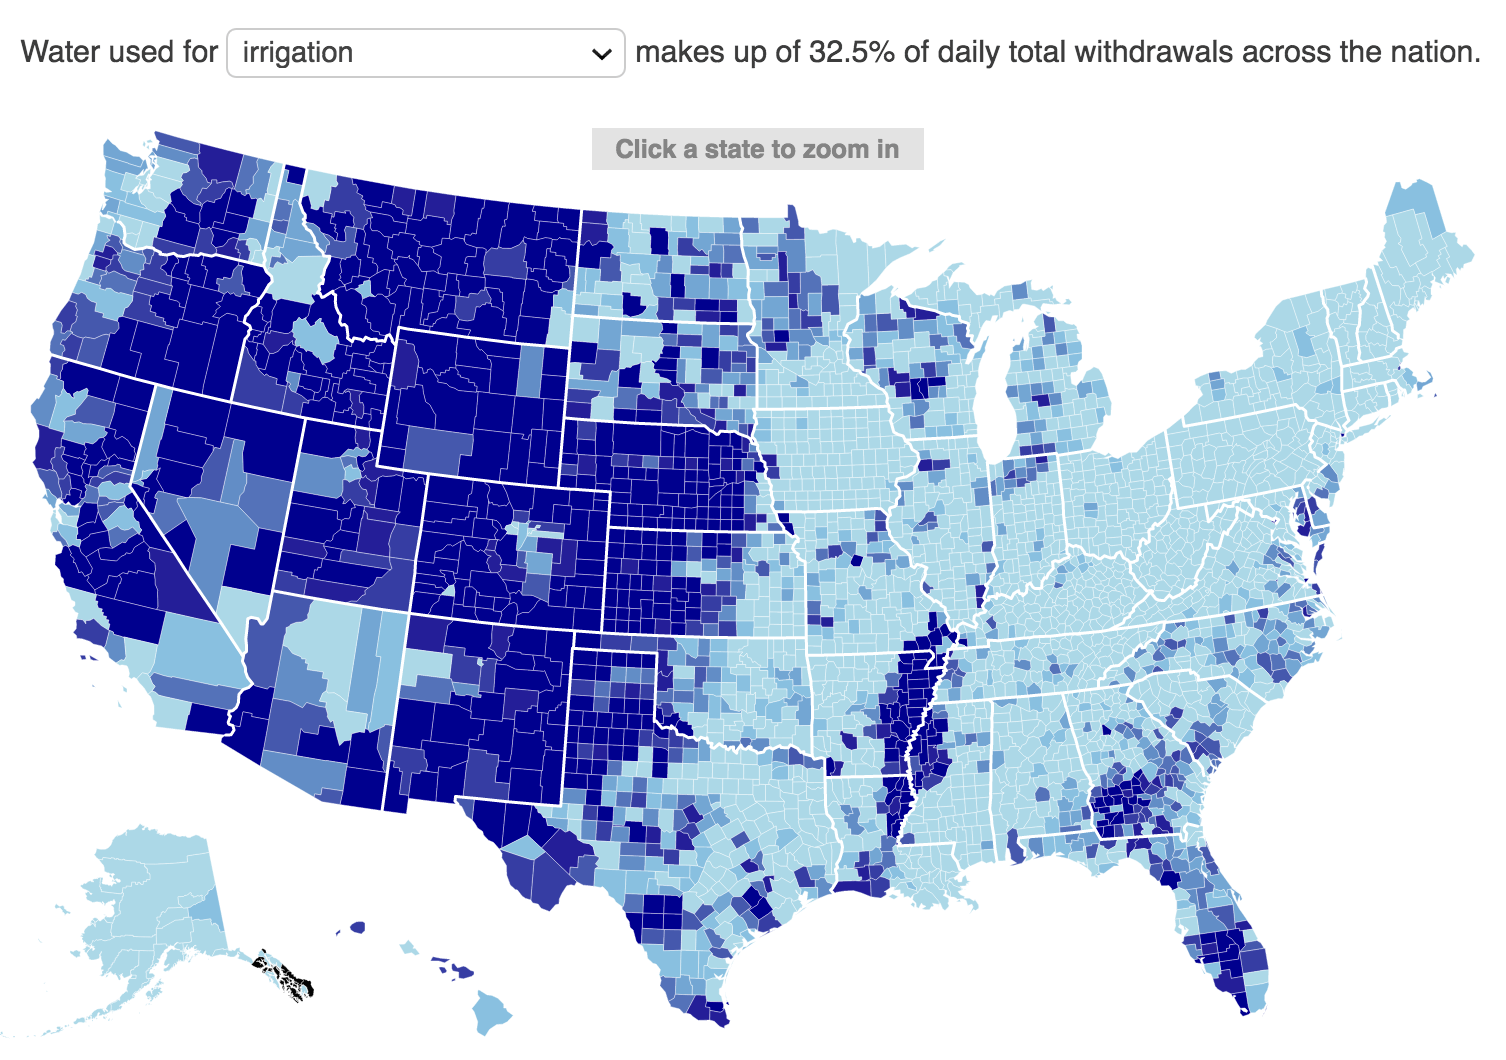 water use in the U.S.